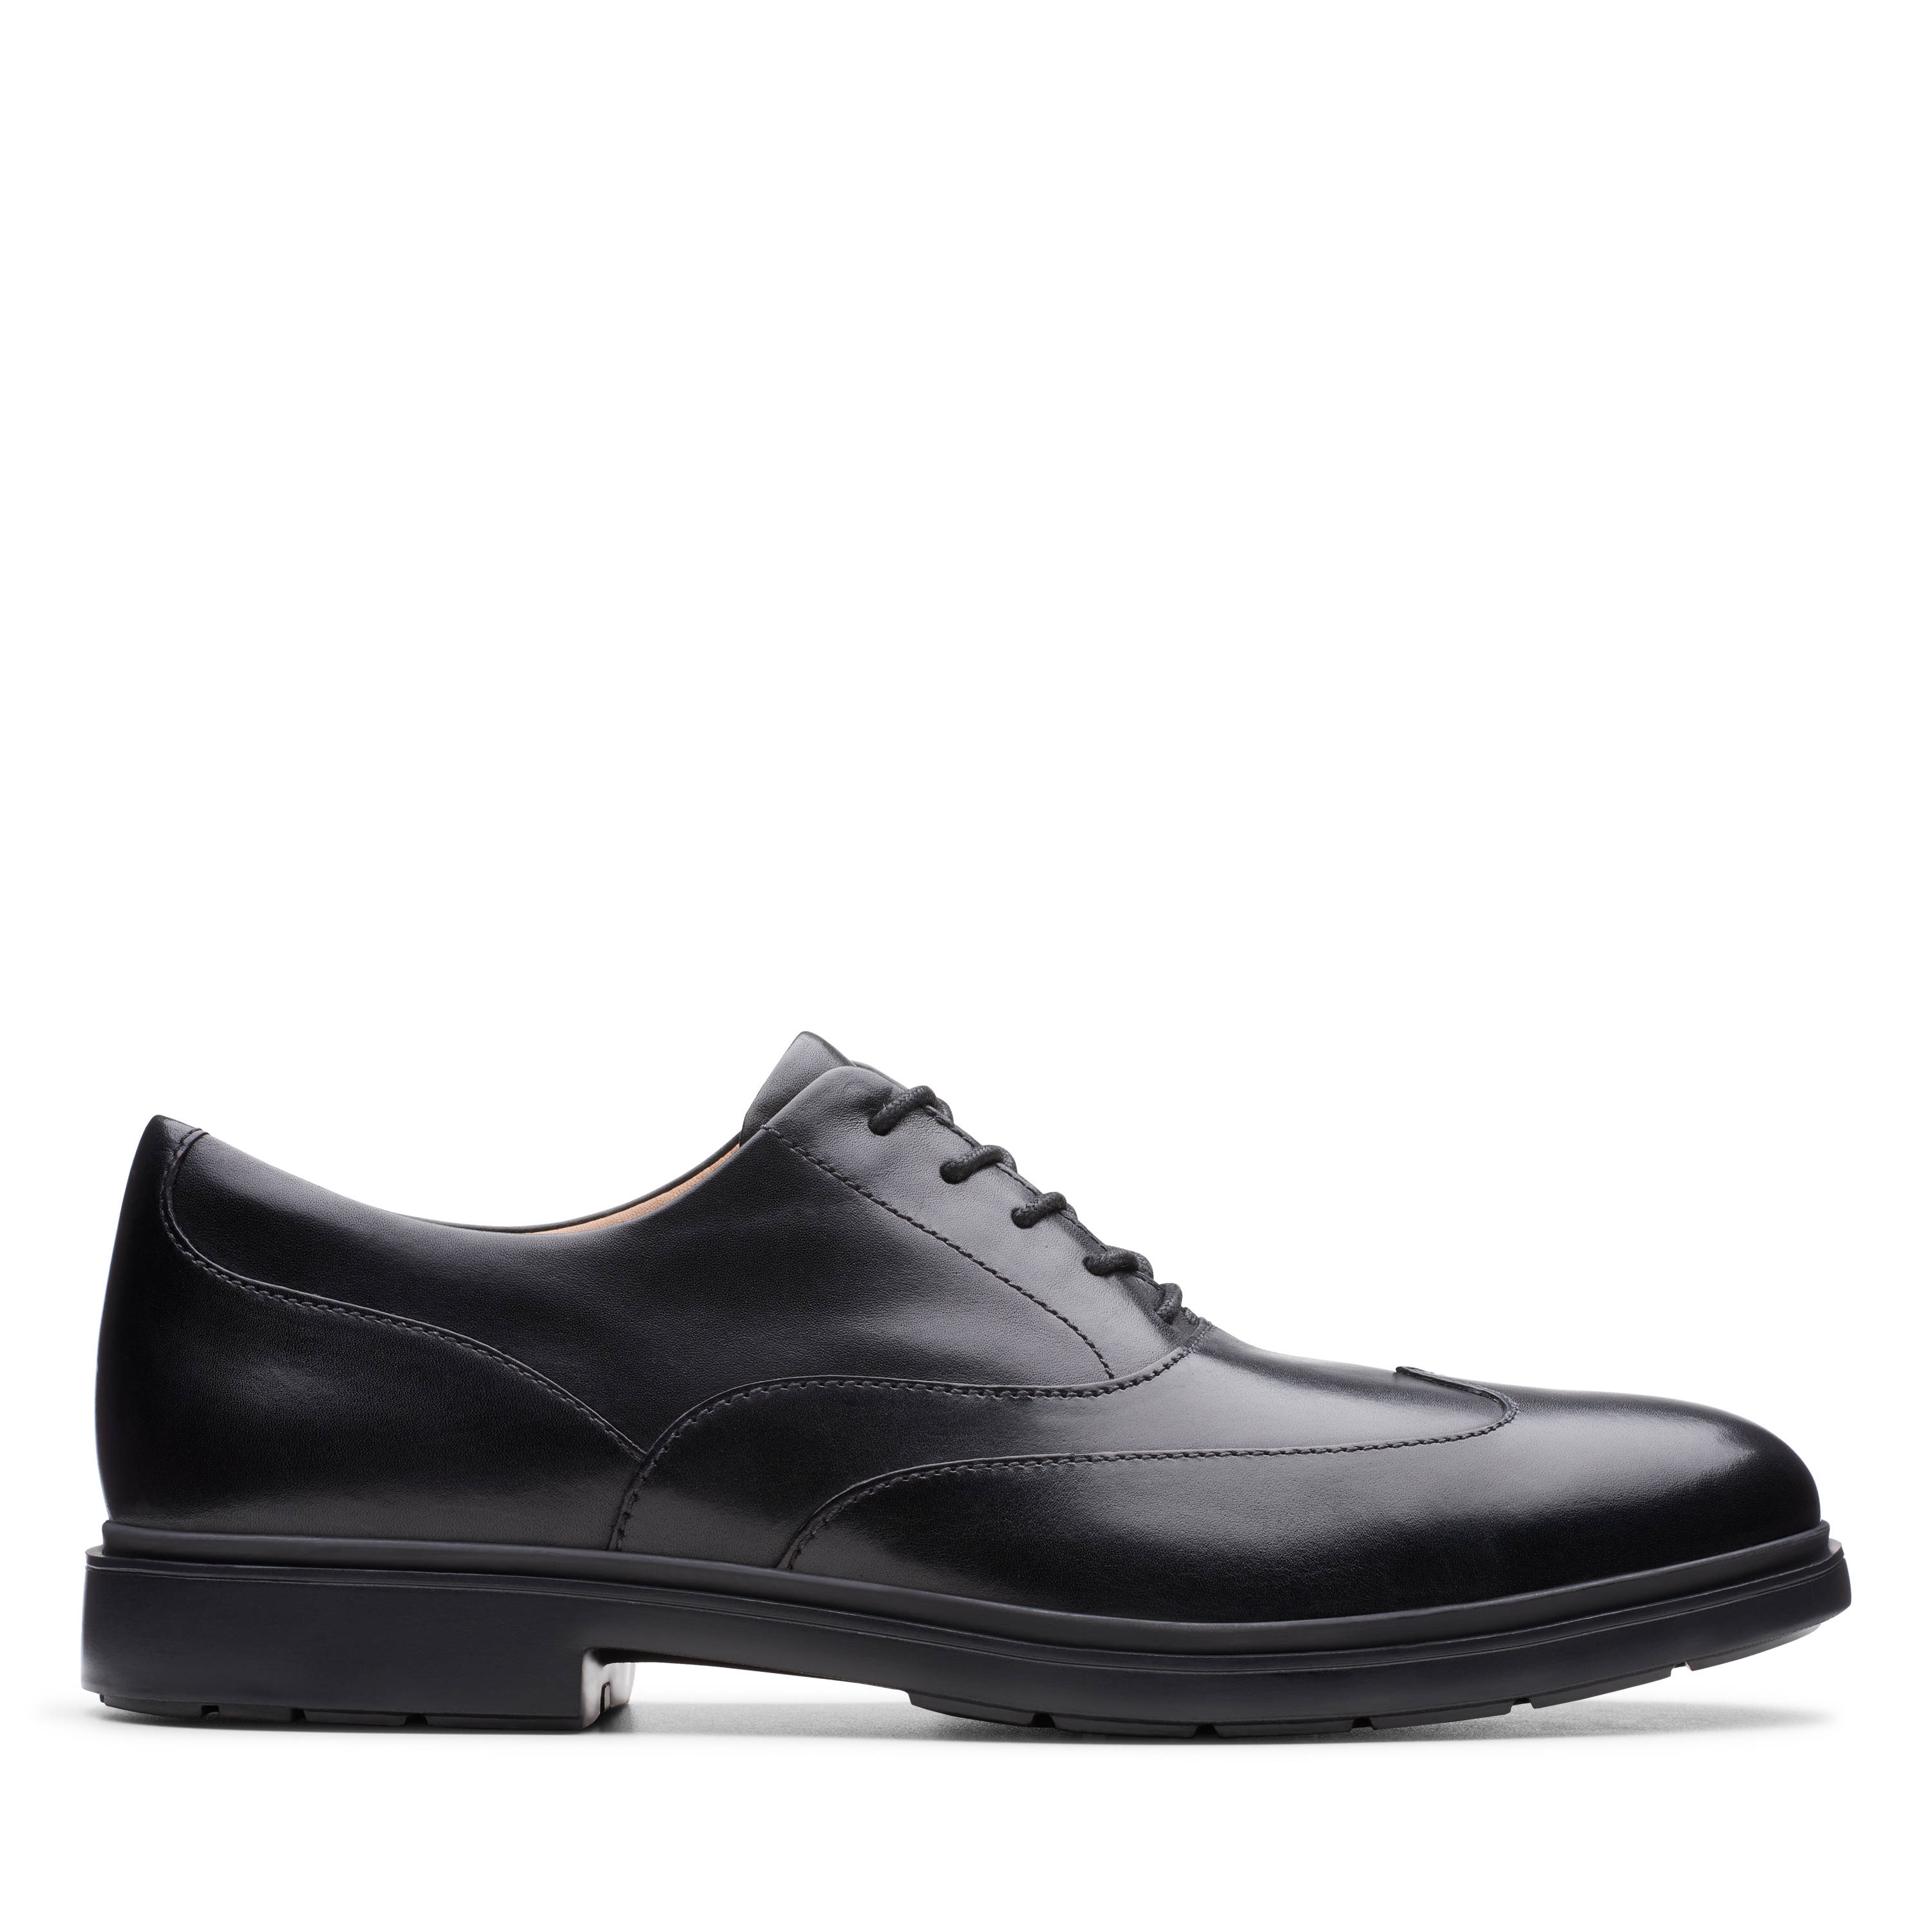 Clarks Un Tailor Wing Leather Shoes in Black 